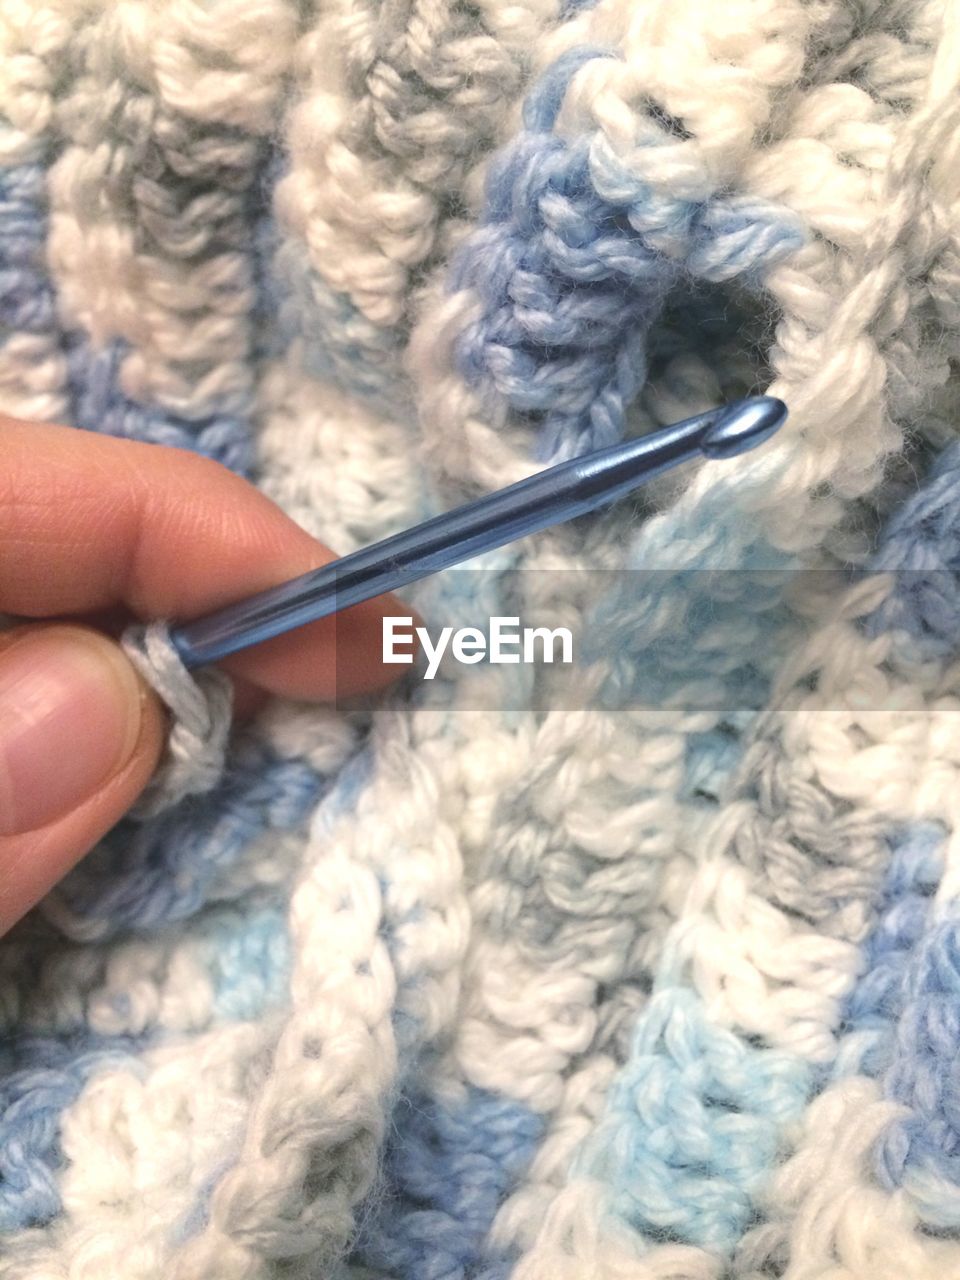 Cropped image of person knitting wool